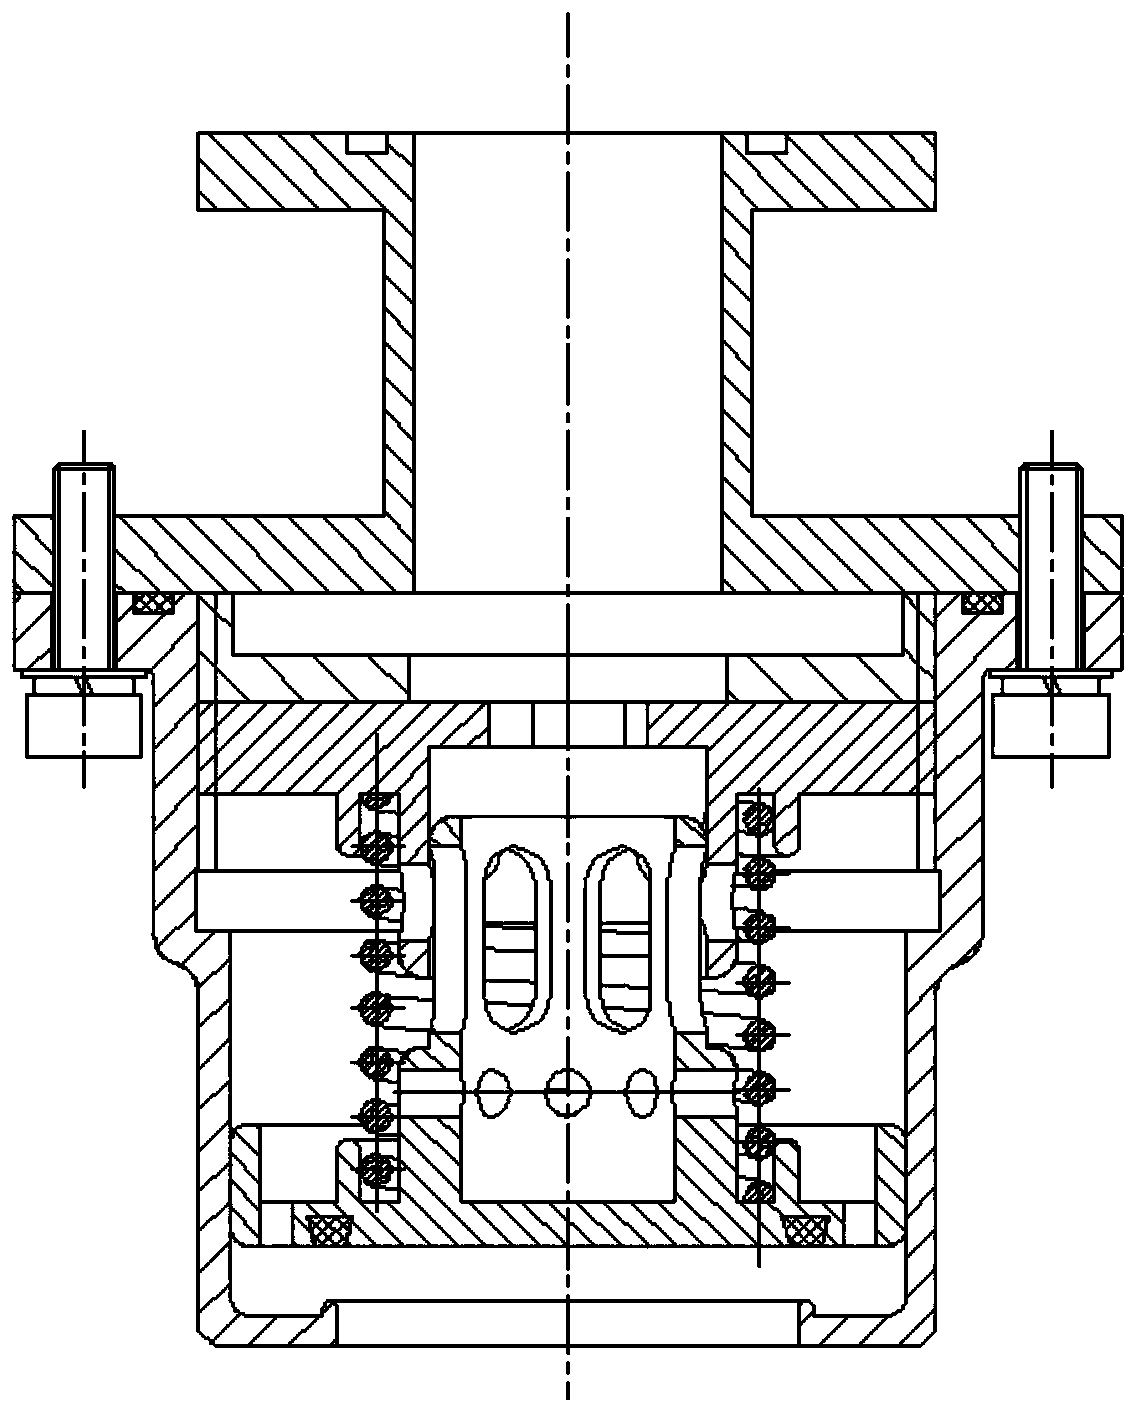 A One-way Pressure Relief Valve Suitable for Pressure Control in Spacecraft Cabin